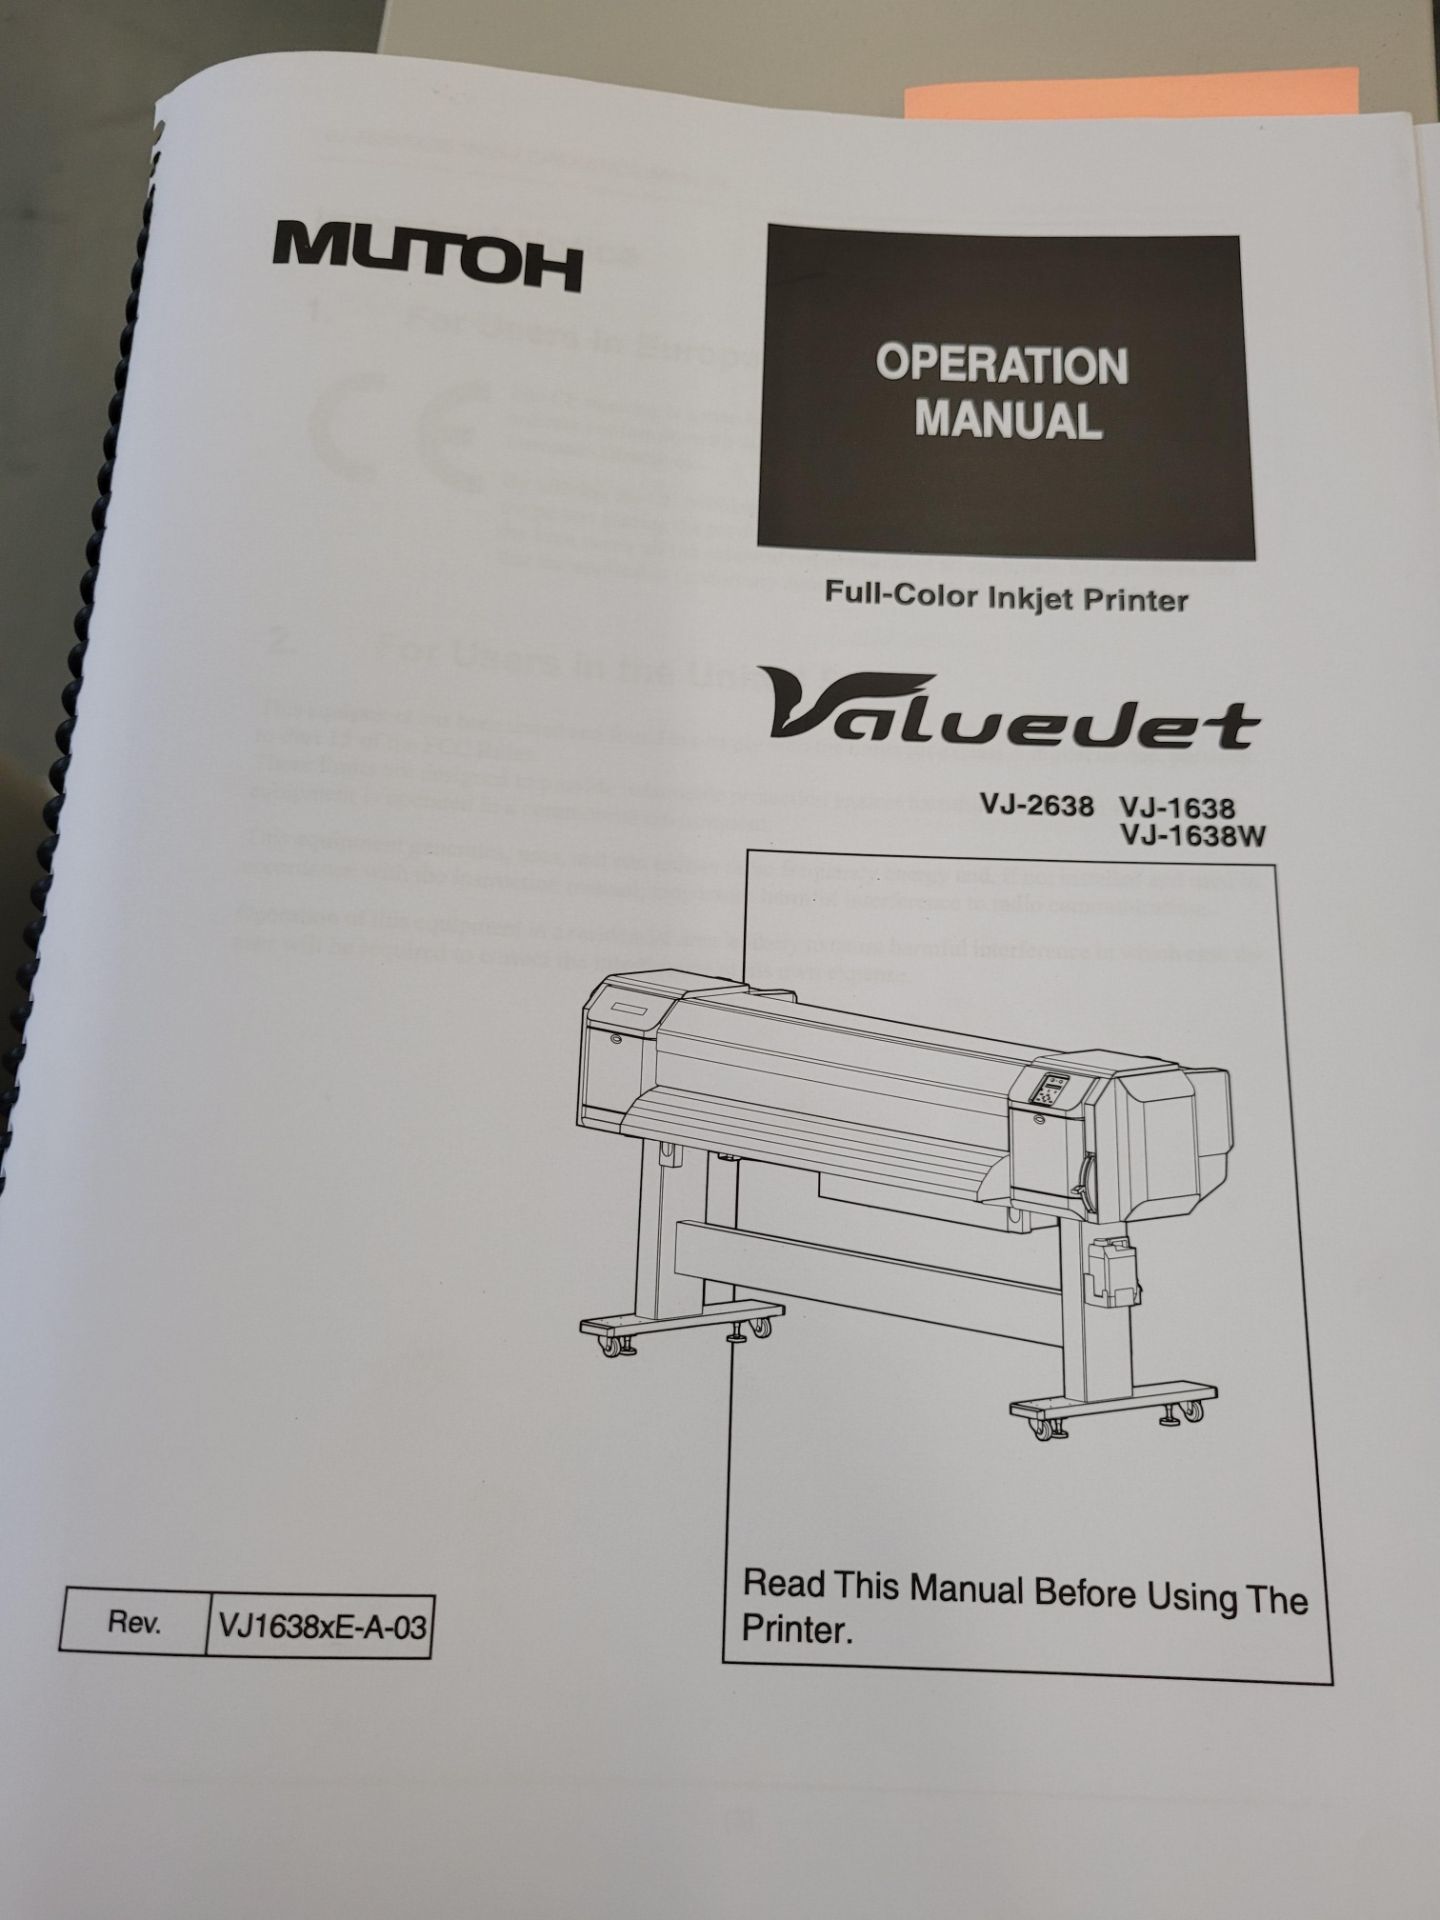 MUTOH 7-Color Printer mod. VS-16TUP30U, 107" x 52" x 42" with toolchest and controller with software - Image 21 of 26